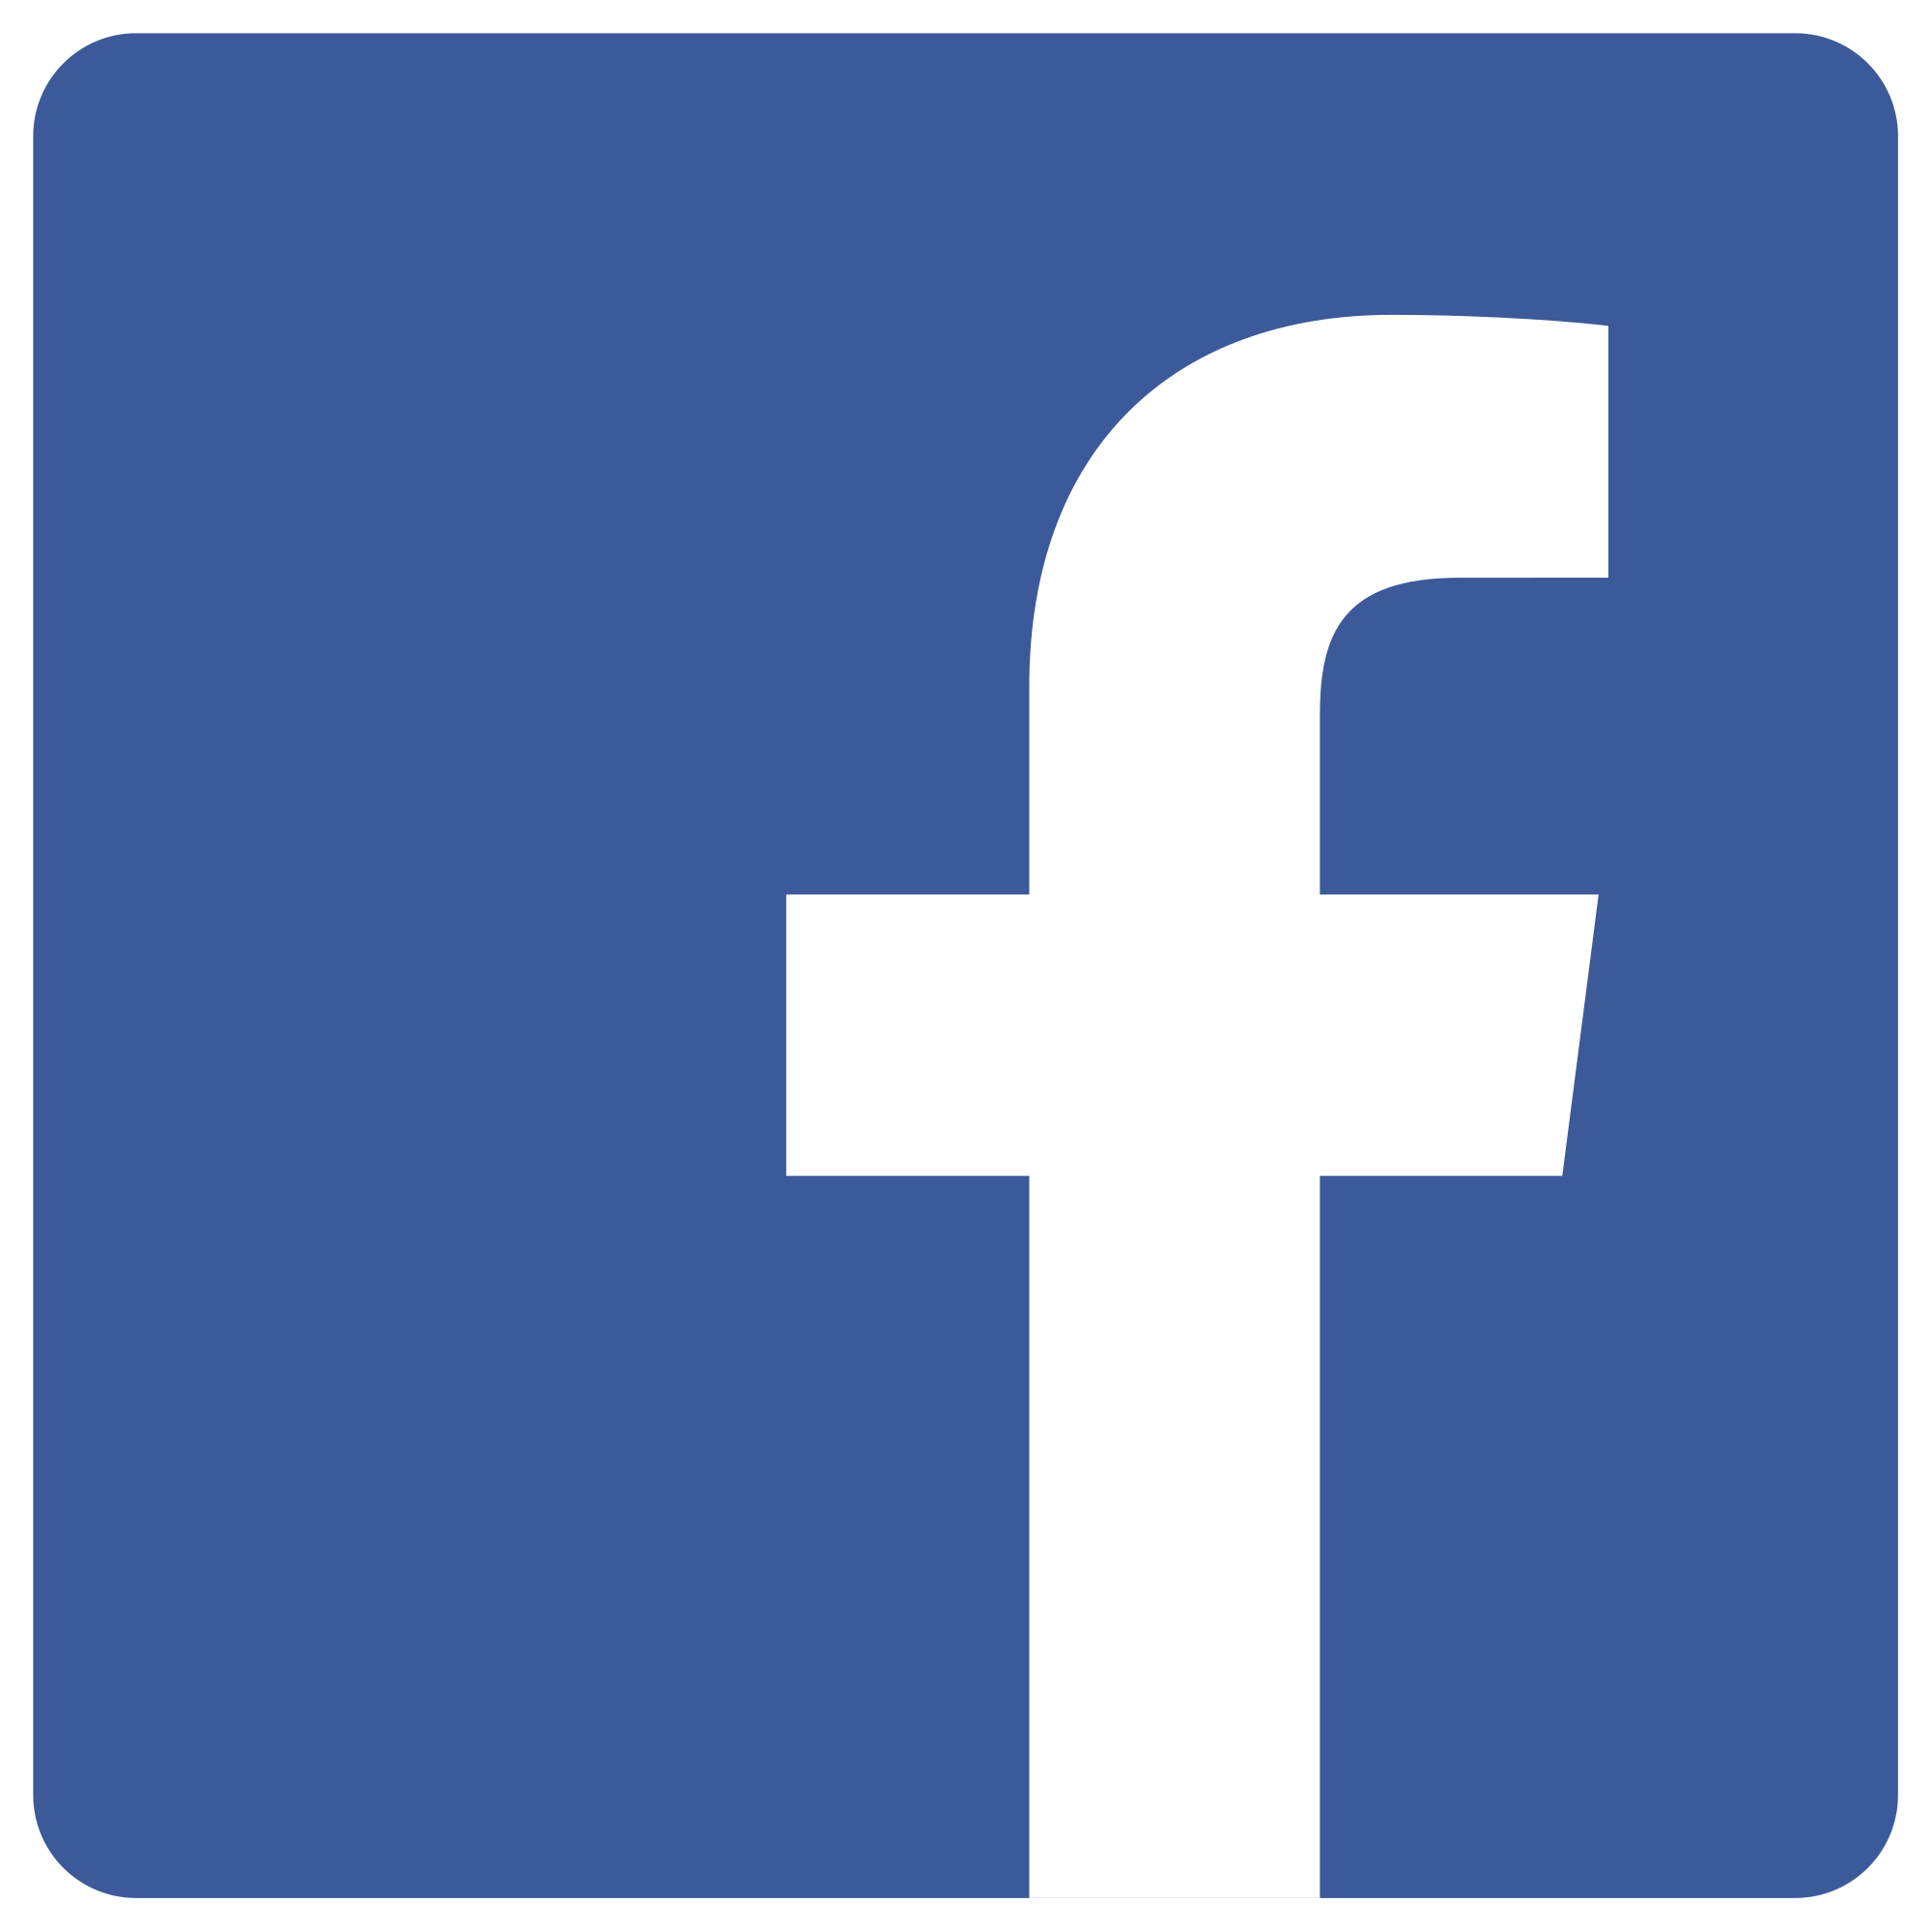 Open Hdpng.com  - Facebook Icon Eps, Transparent background PNG HD thumbnail